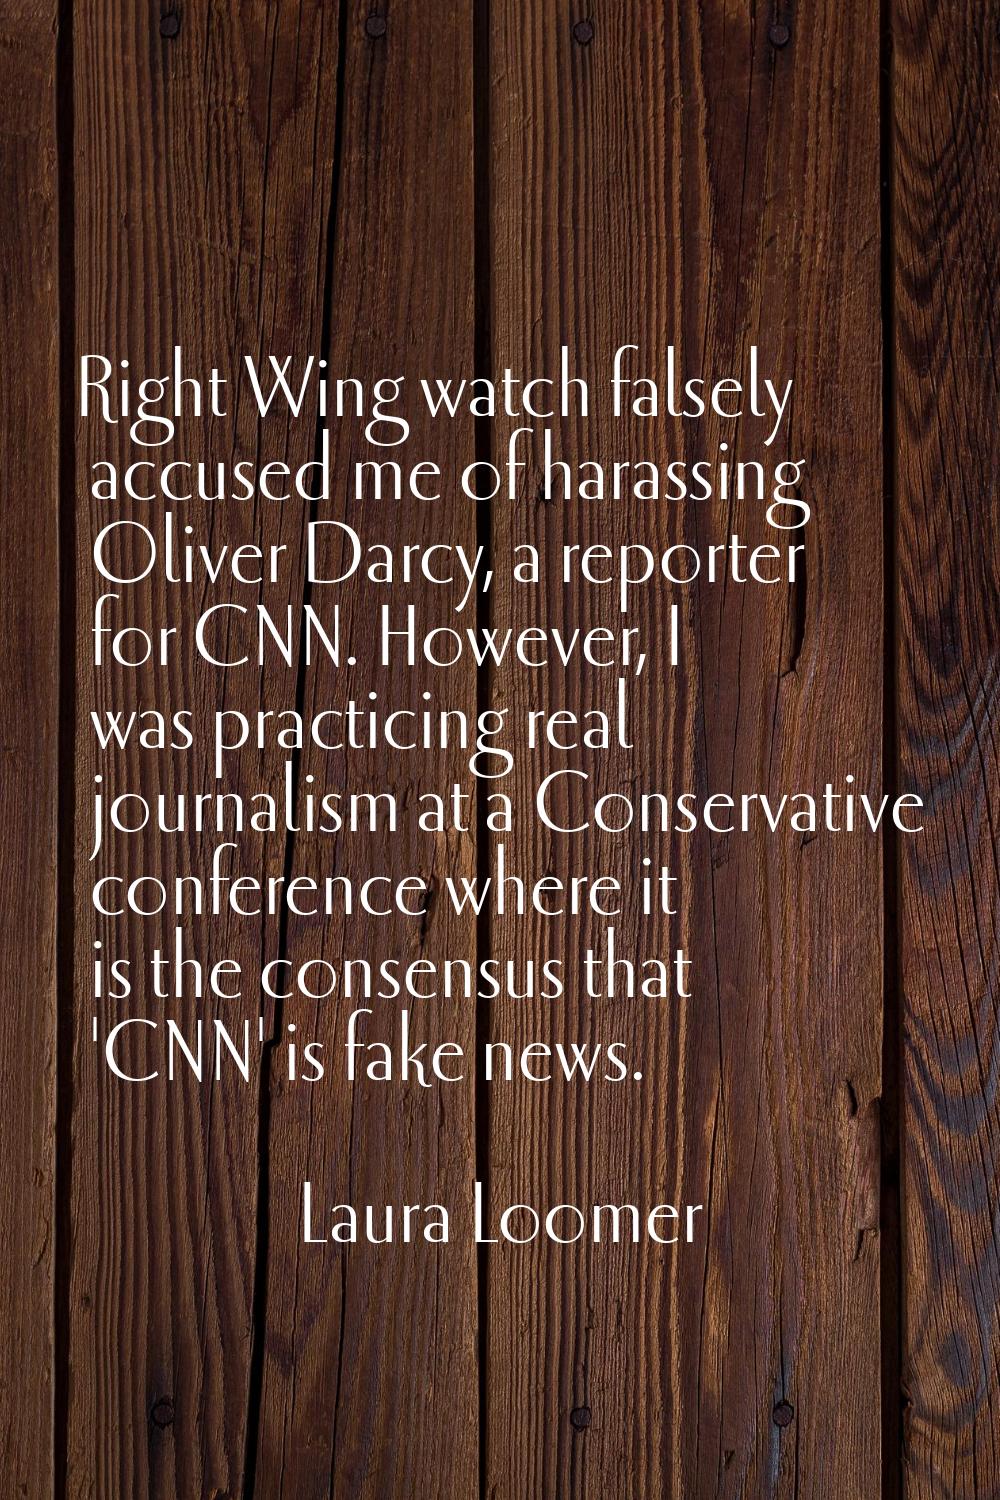 Right Wing watch falsely accused me of harassing Oliver Darcy, a reporter for CNN. However, I was p